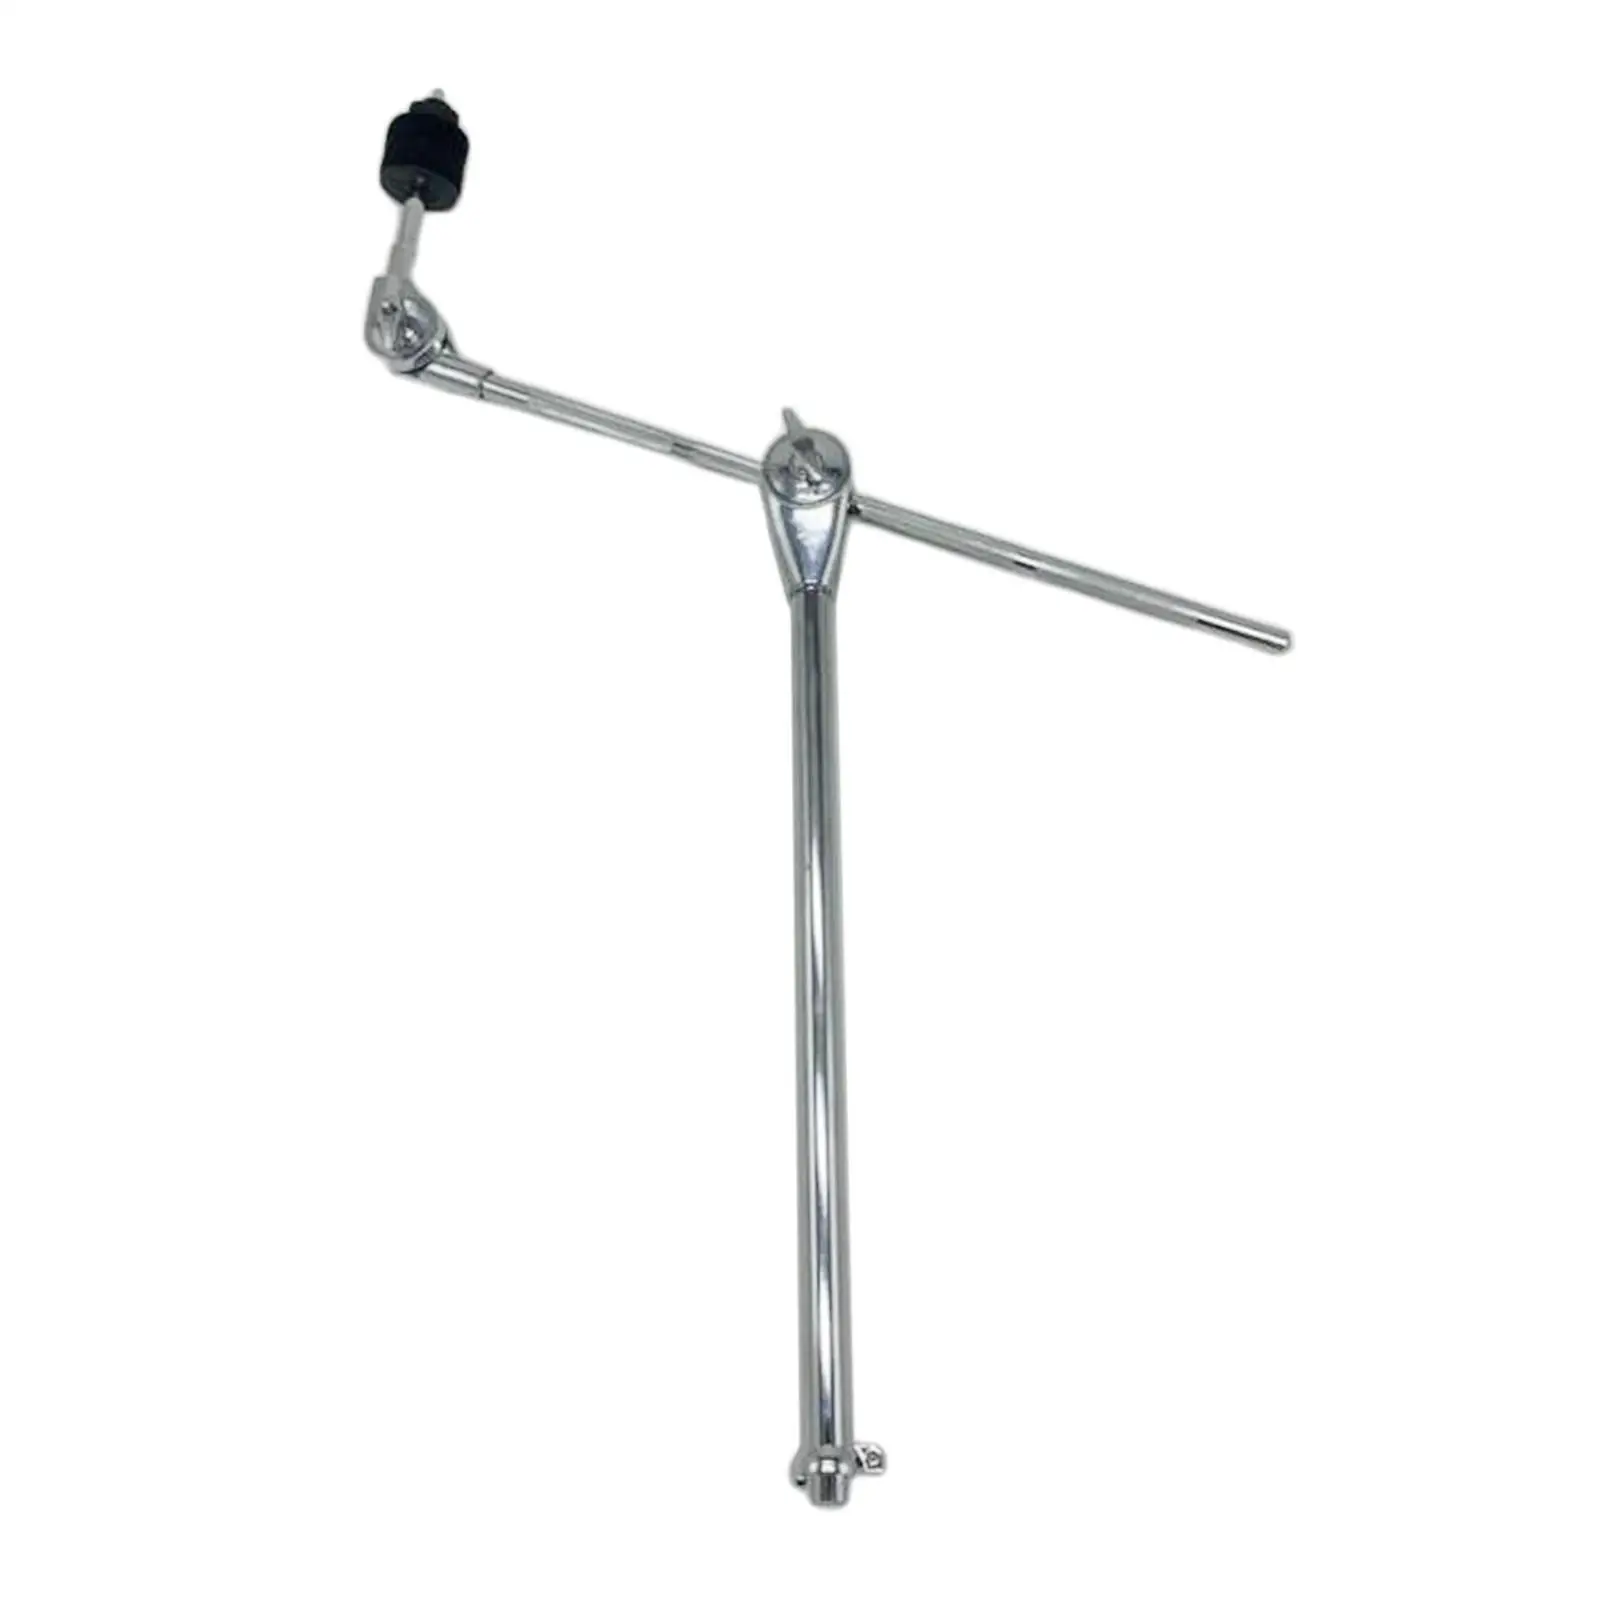 Cymbal Boom Holder Dual Locking Drum Parts Adjustable Percussion Accessories Sturdy Cymbal Stand Extension Clamp Mount Hardware